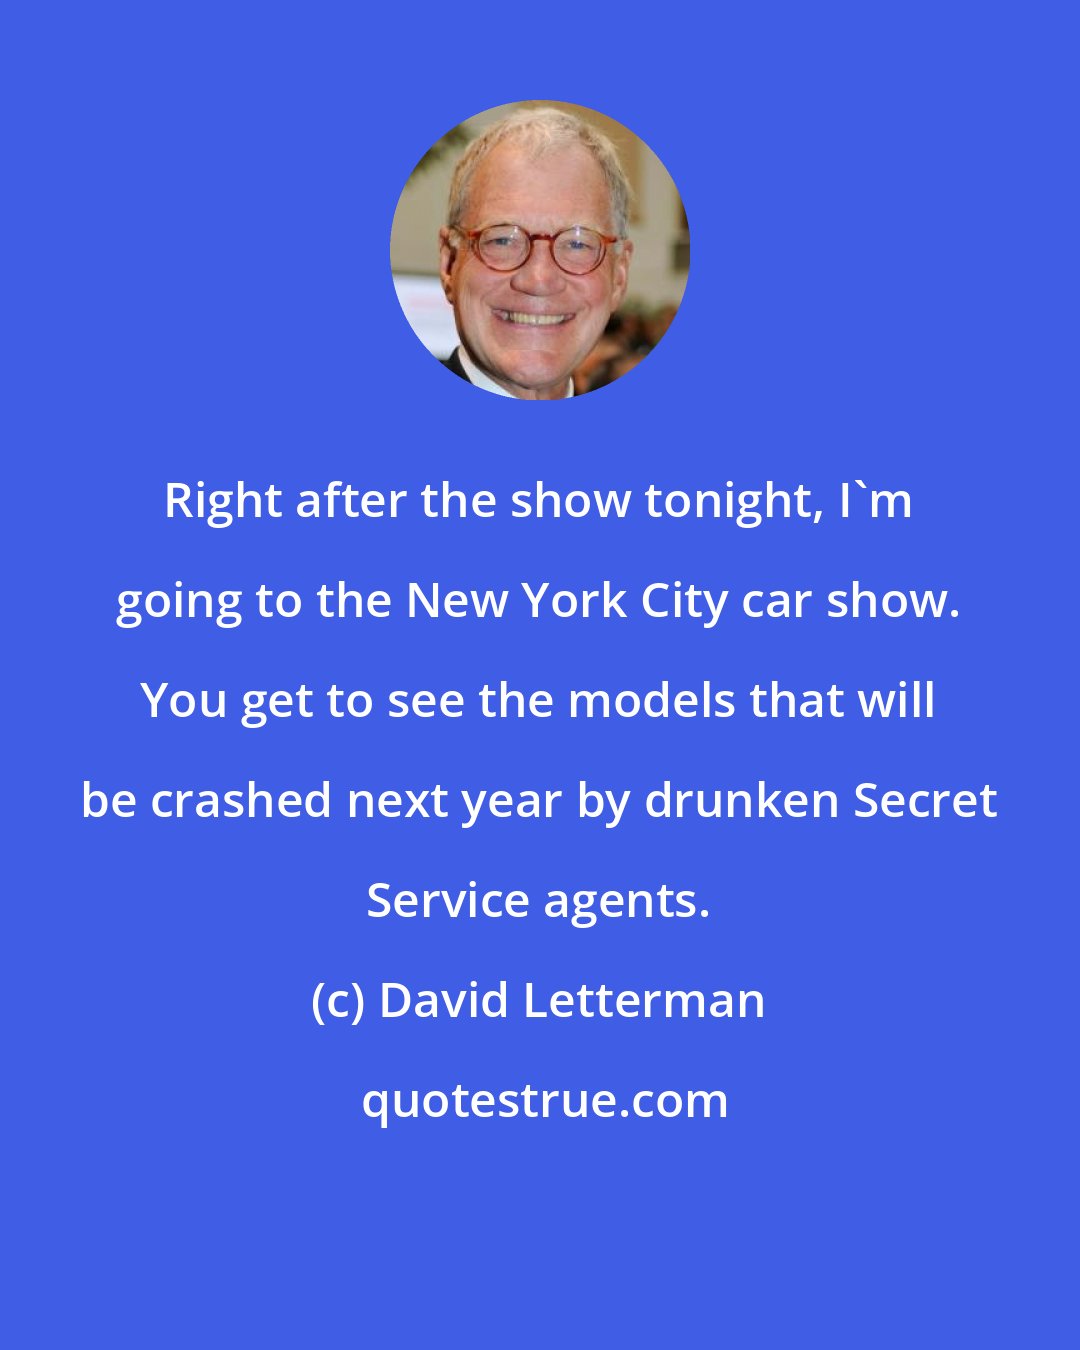 David Letterman: Right after the show tonight, I'm going to the New York City car show. You get to see the models that will be crashed next year by drunken Secret Service agents.